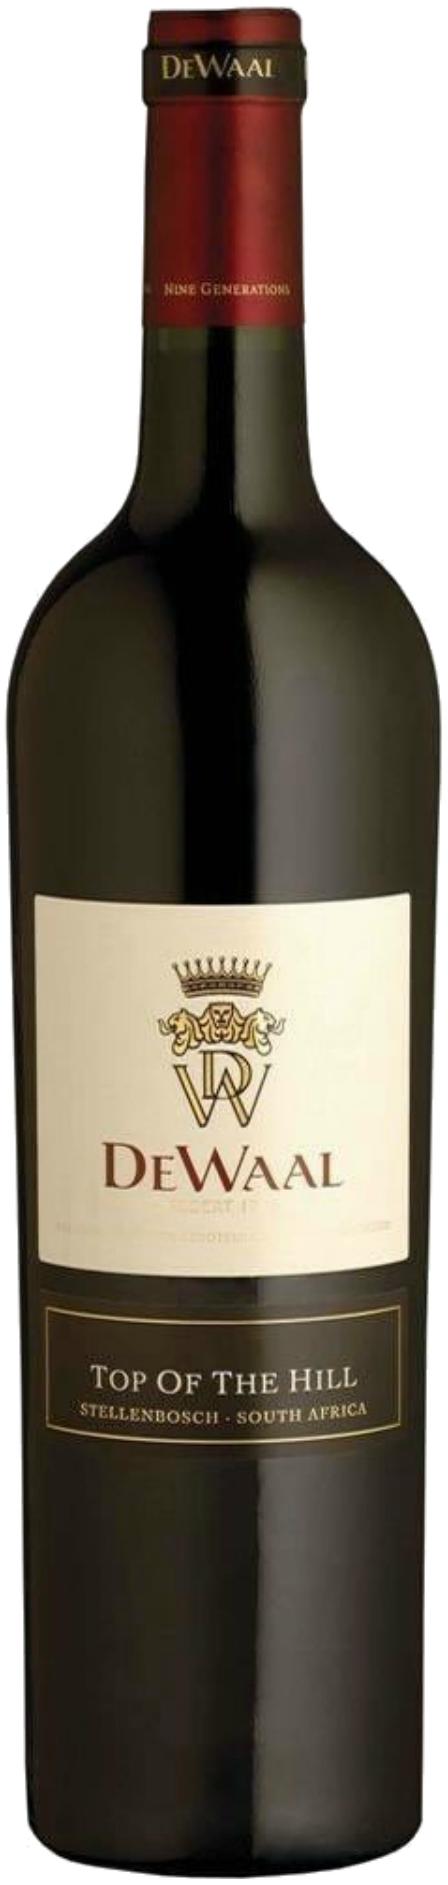 DeWaal Top of the Hill Pinotage 2018